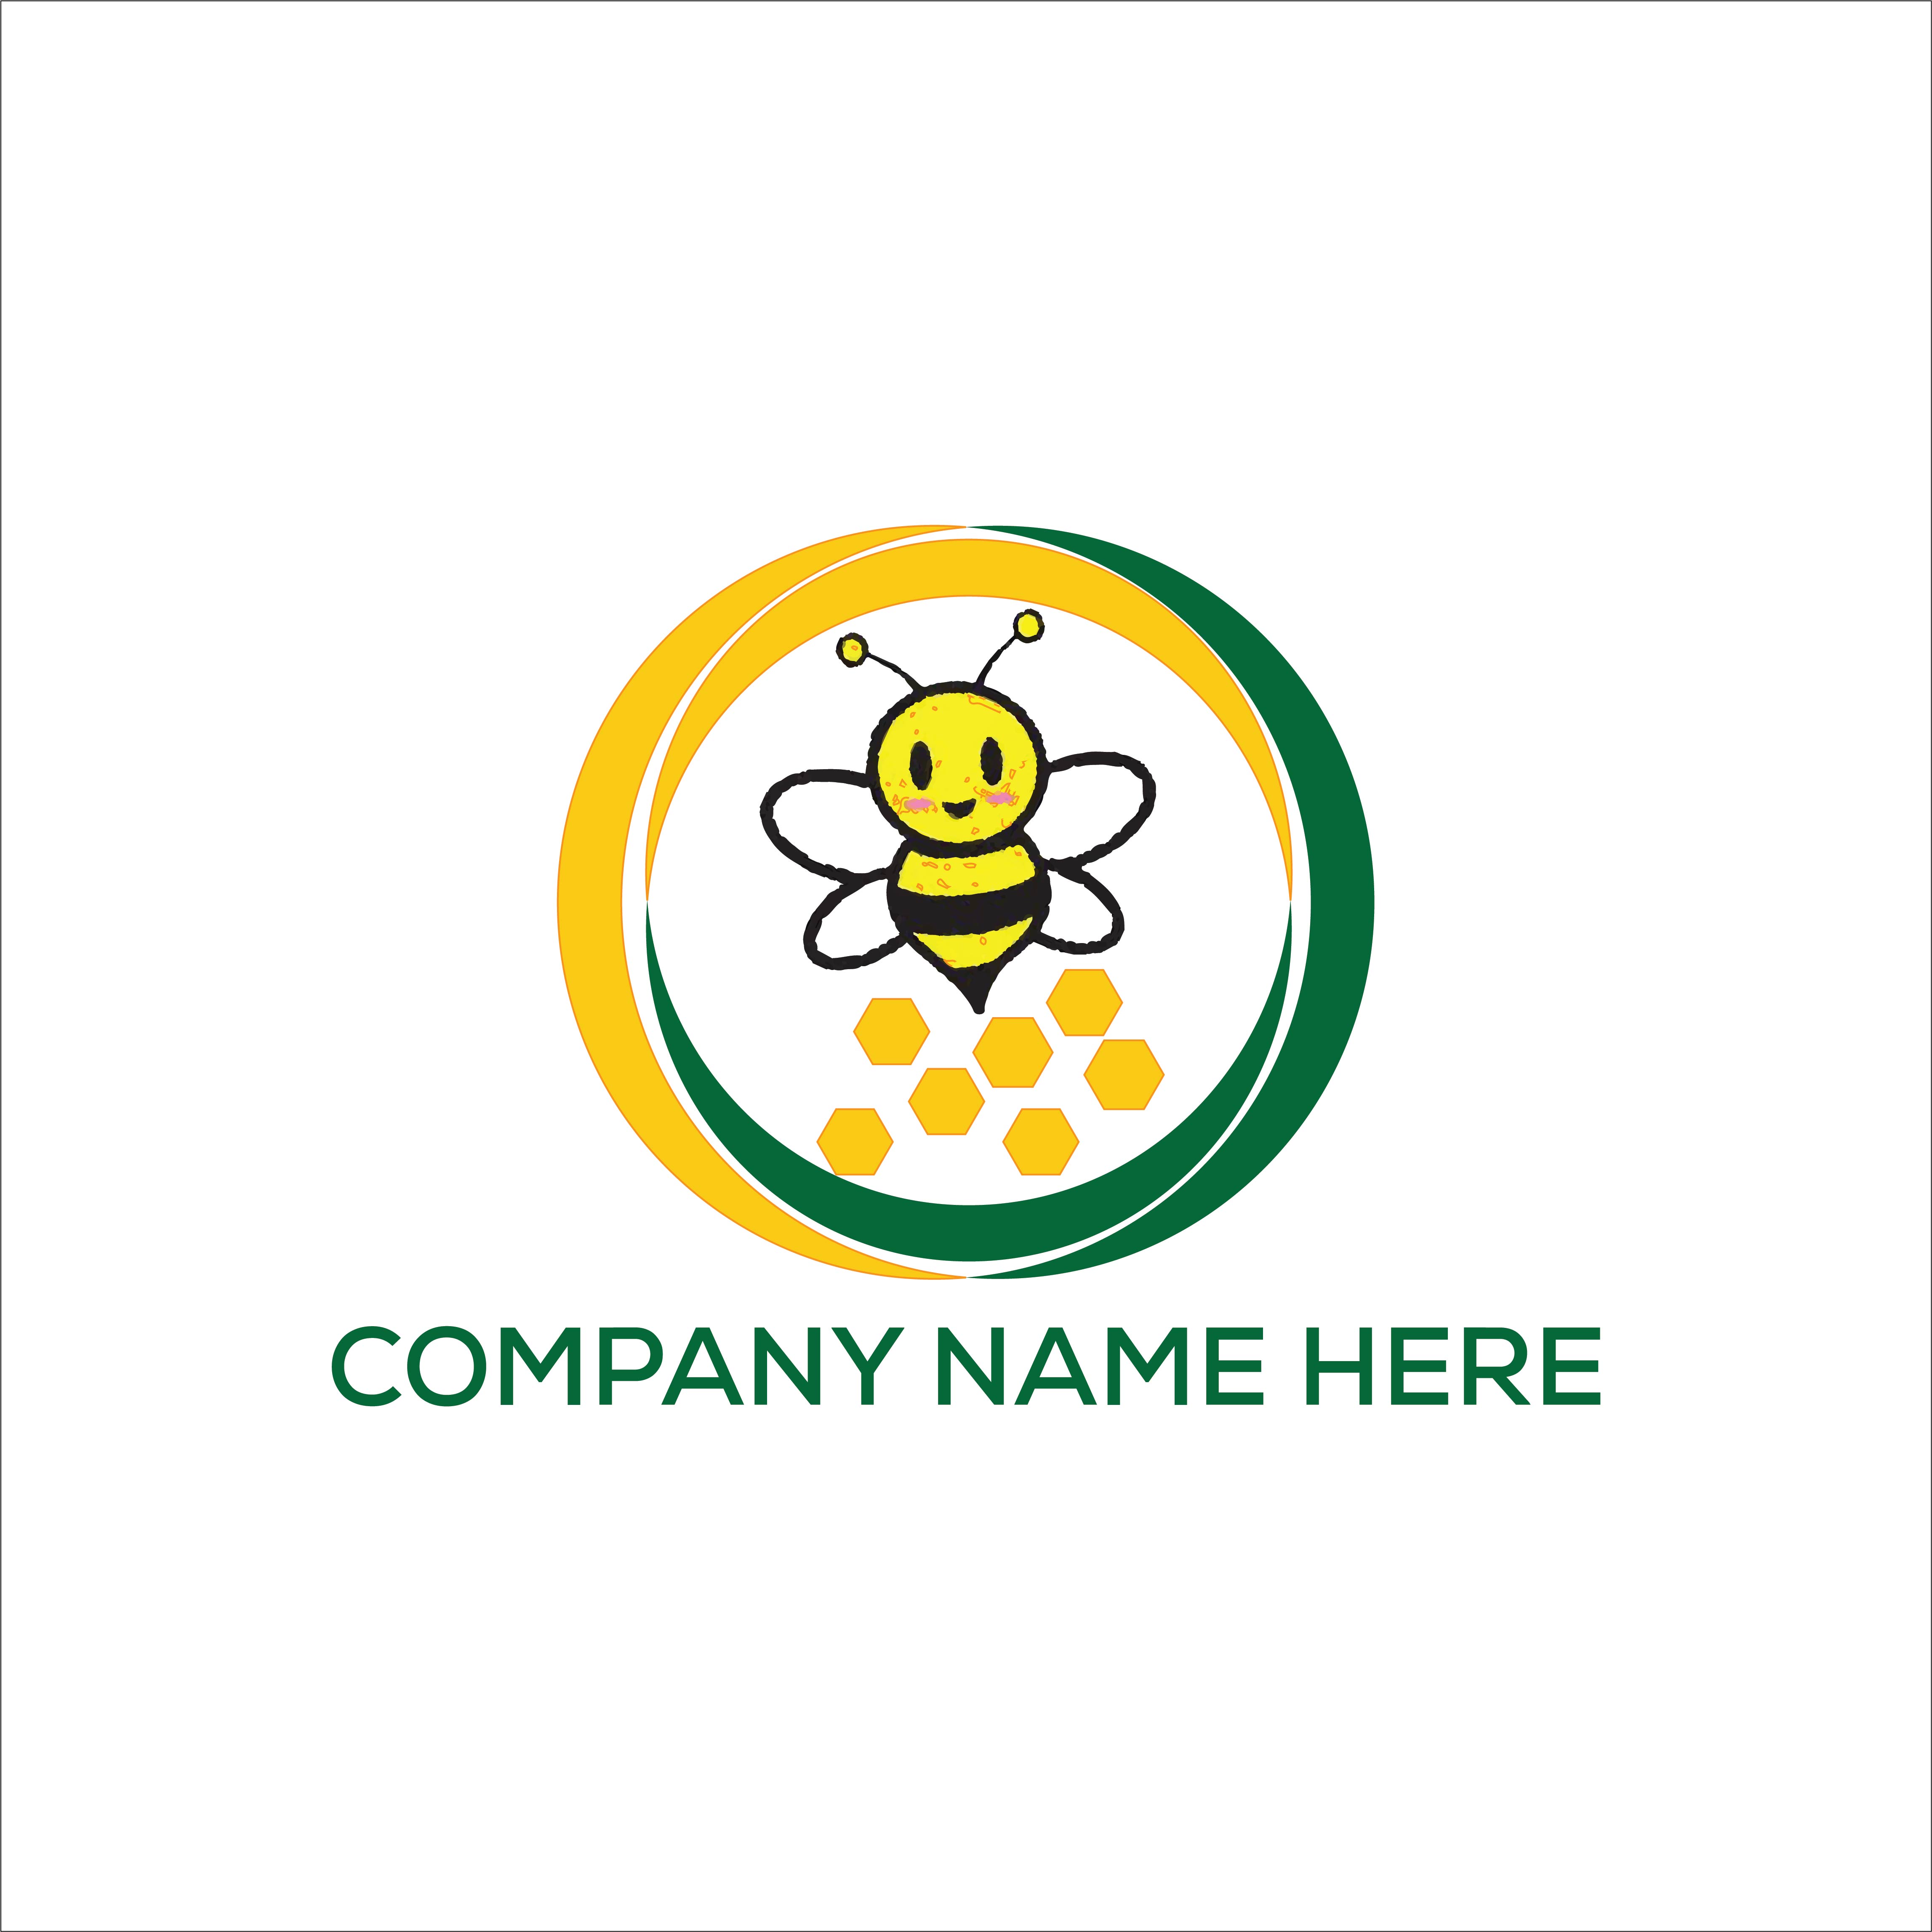 Honey Bee Logo or Icon Design Vector Image Template cover image.